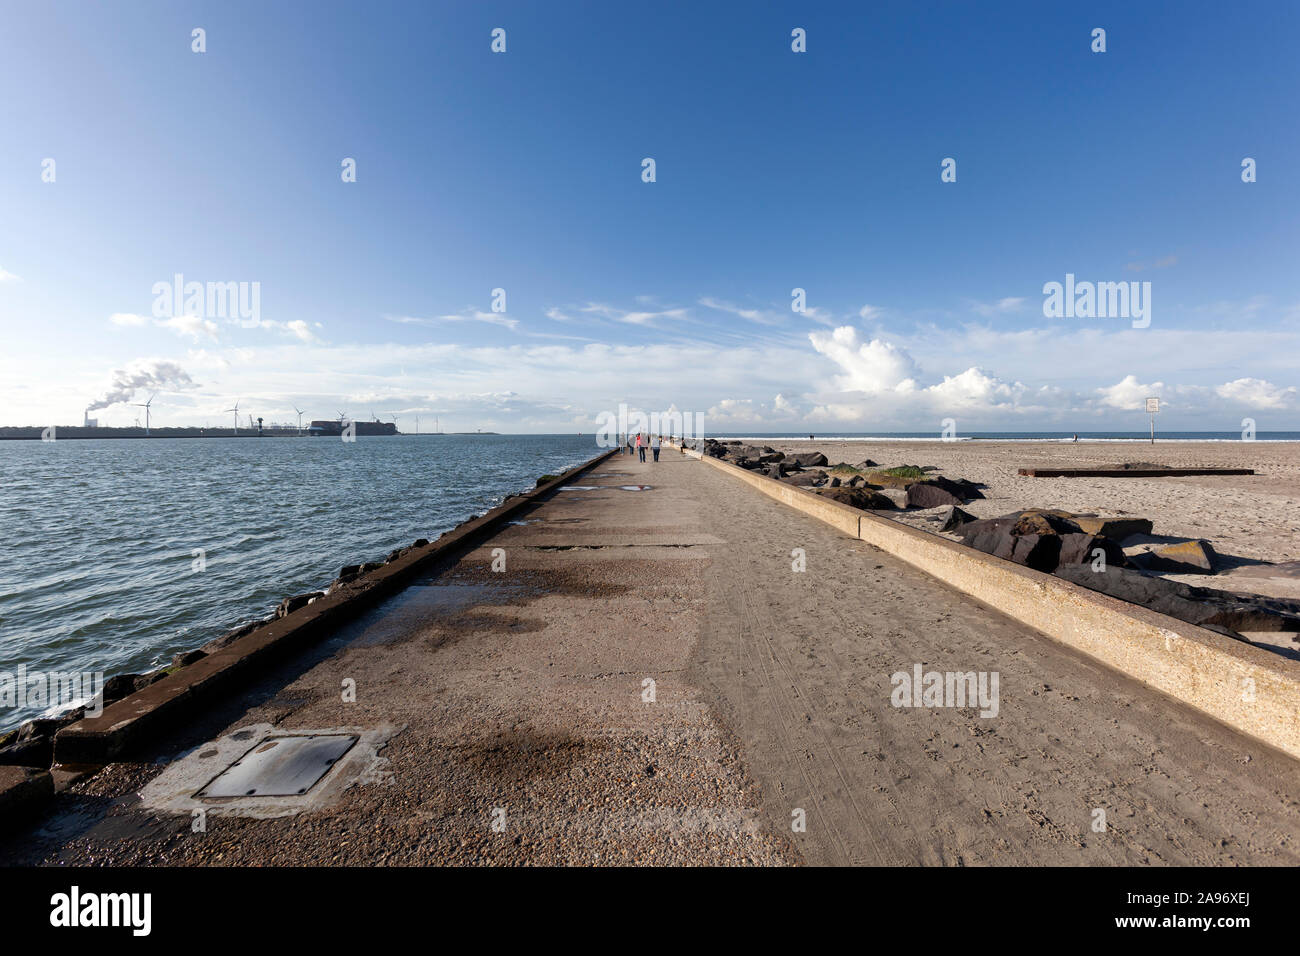 Page 3 - Holland Right High Resolution Stock Photography and Images - Alamy